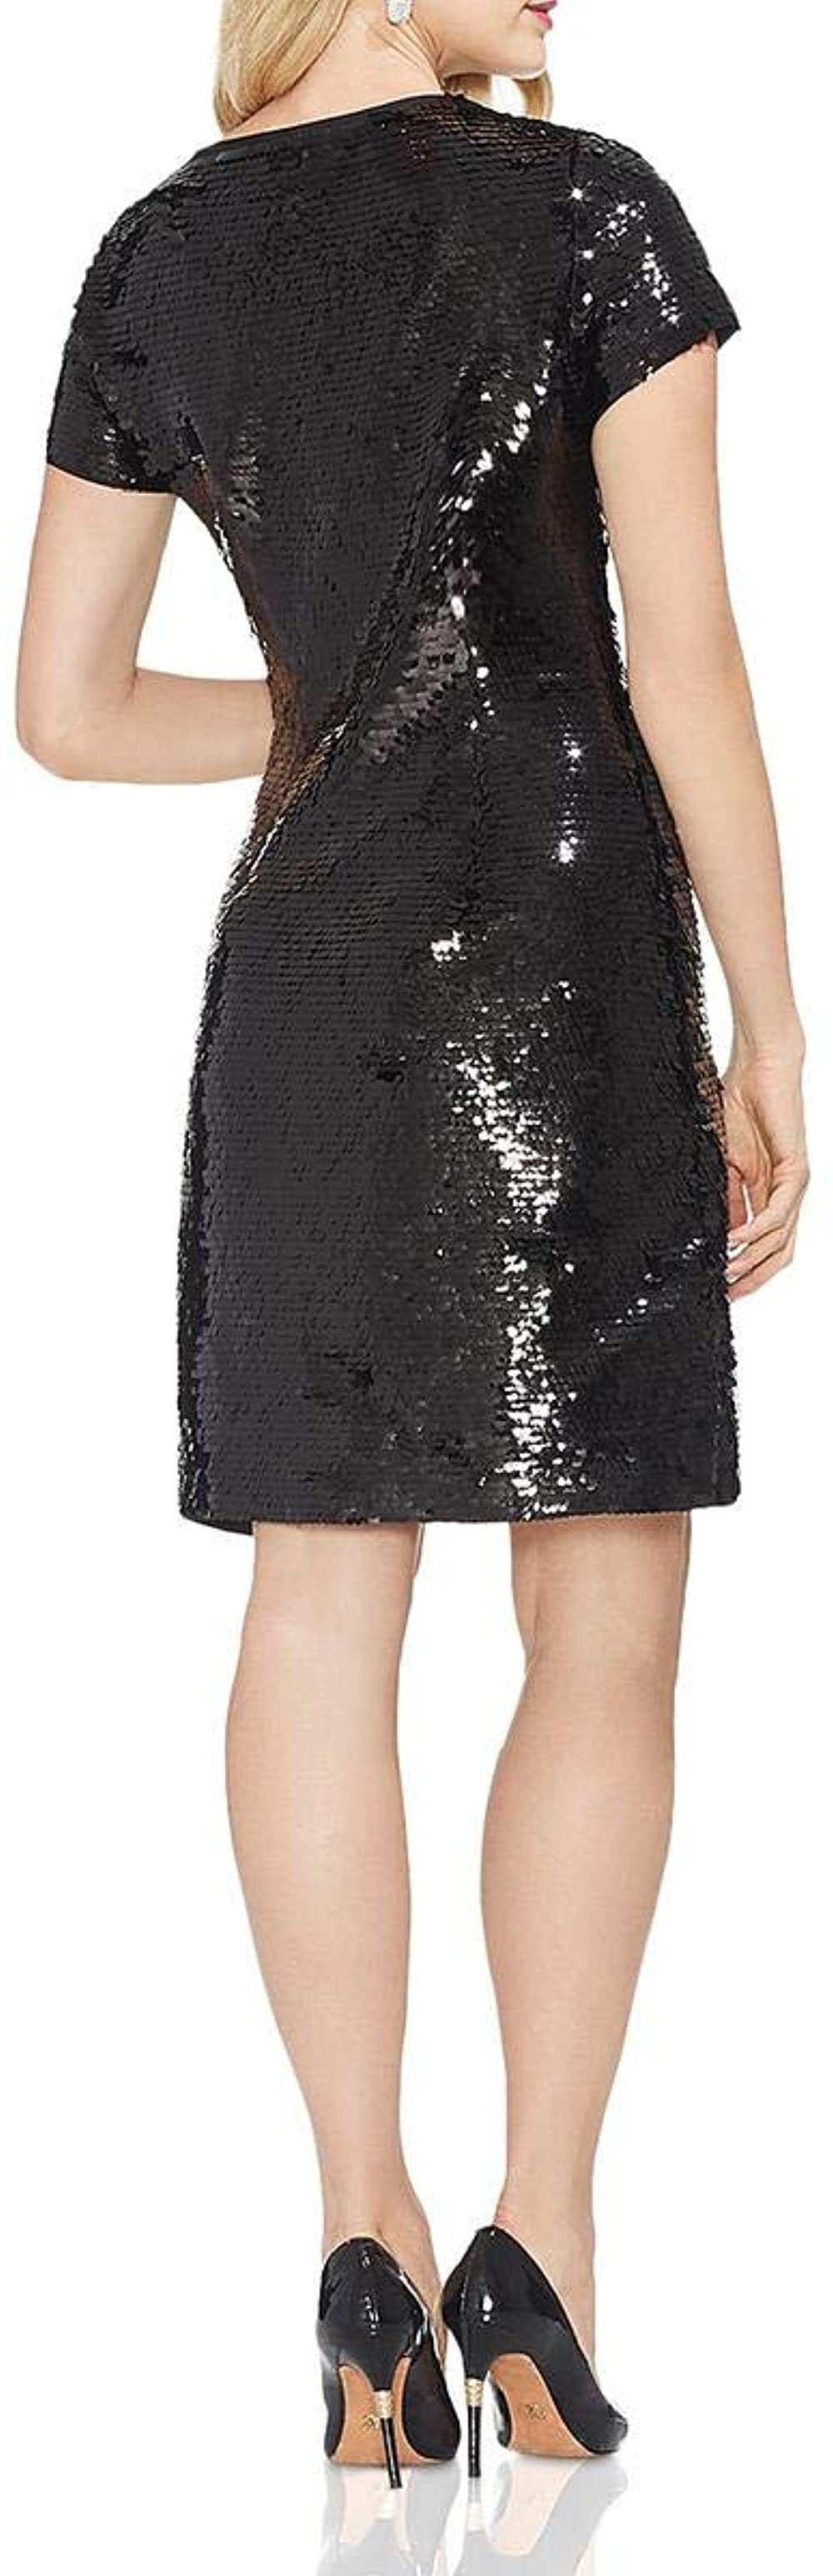 Vince Camuto Womens Fish Scale Sequined Dress